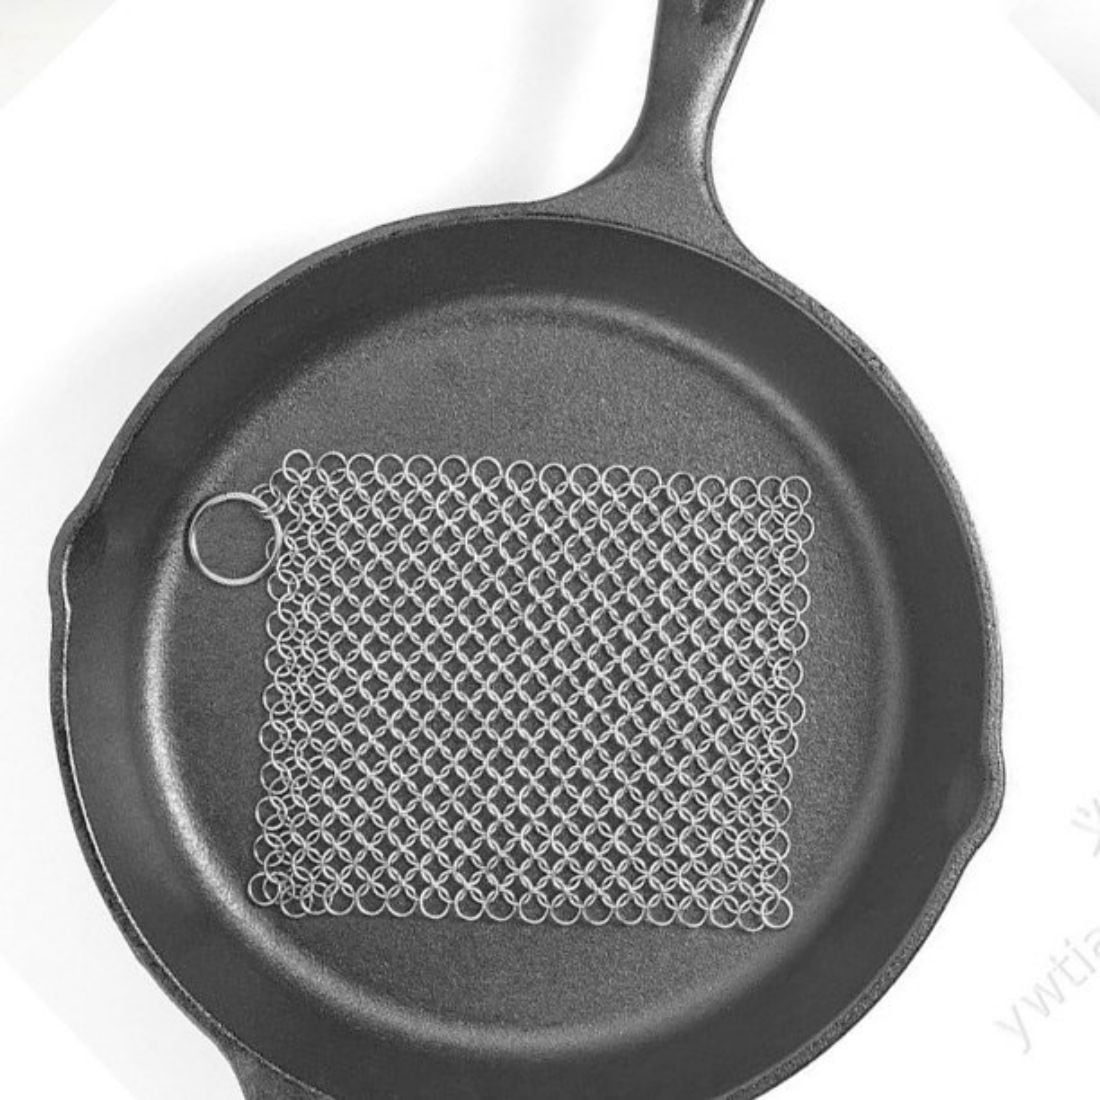 Cleaning pans : r/castiron